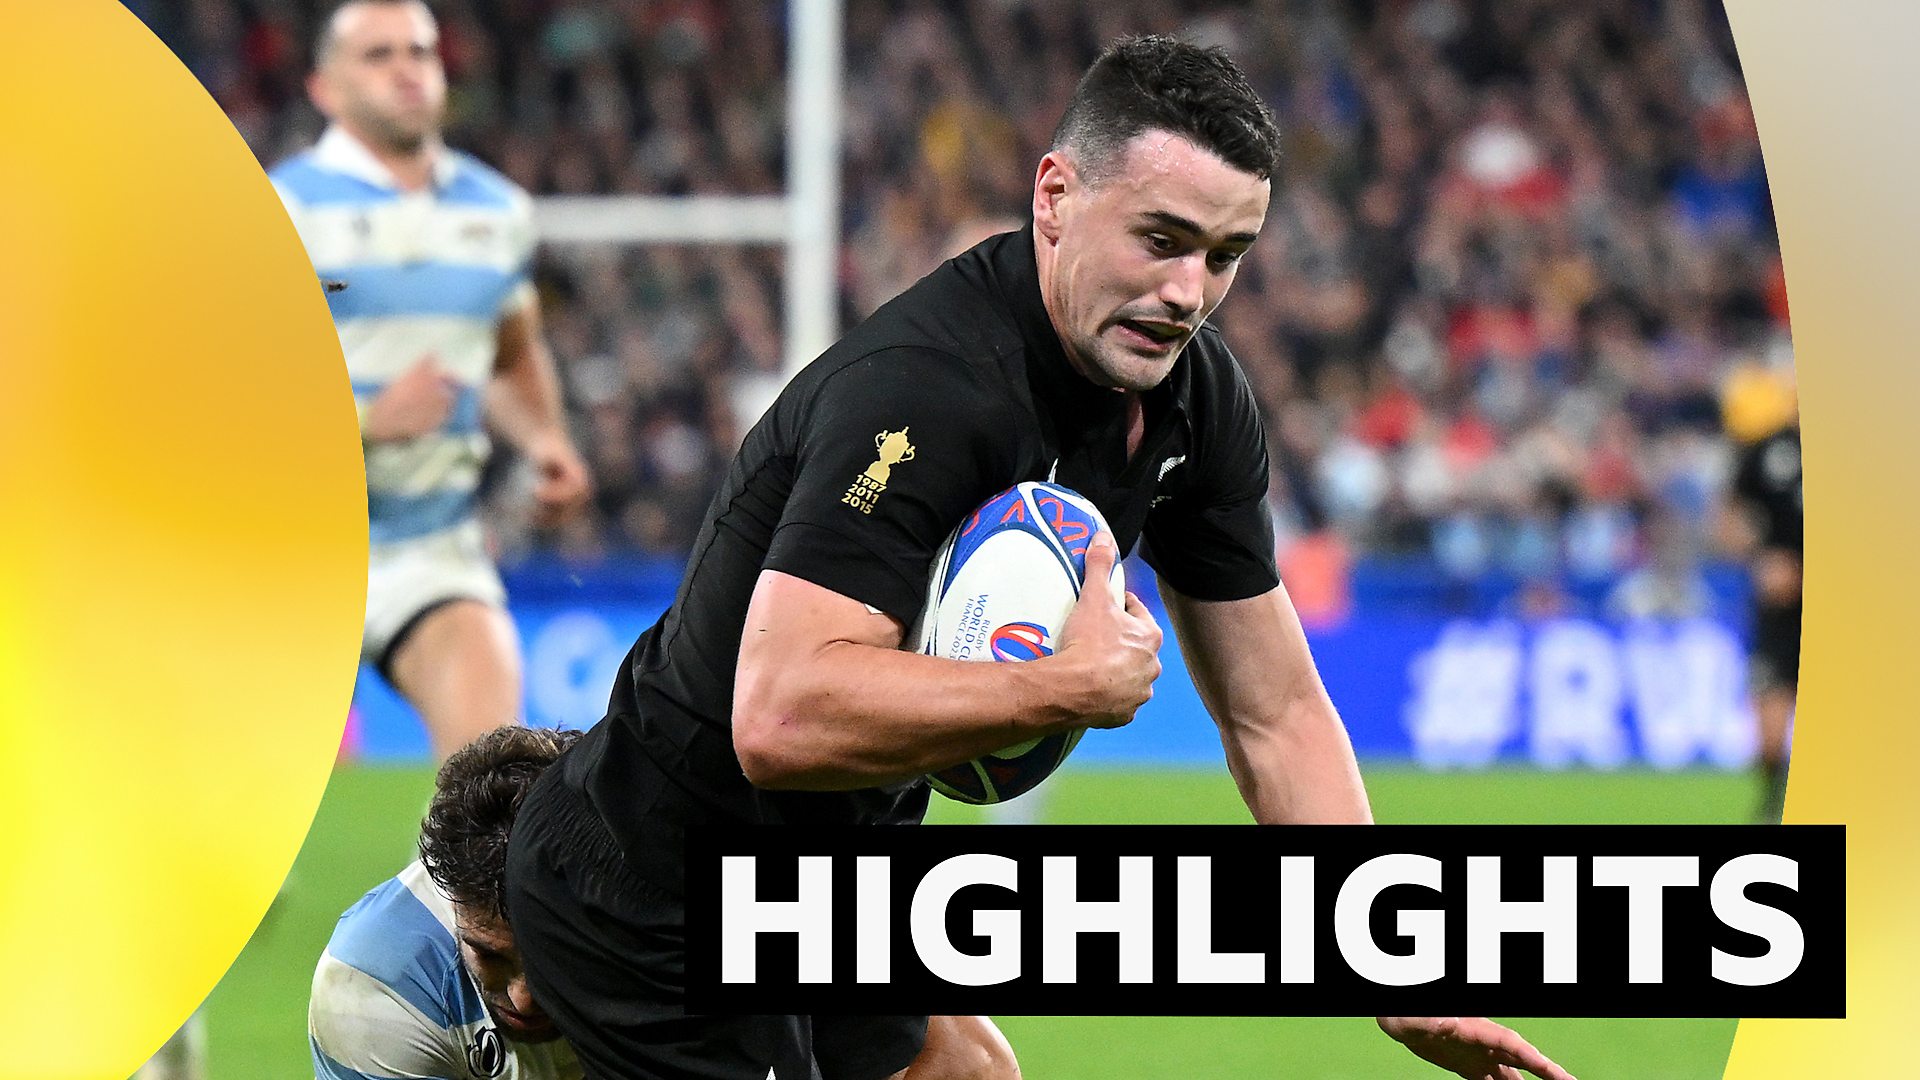 Rugby World Cup Watch highlights as New Zealand beat Argentina 44-6 to reach final